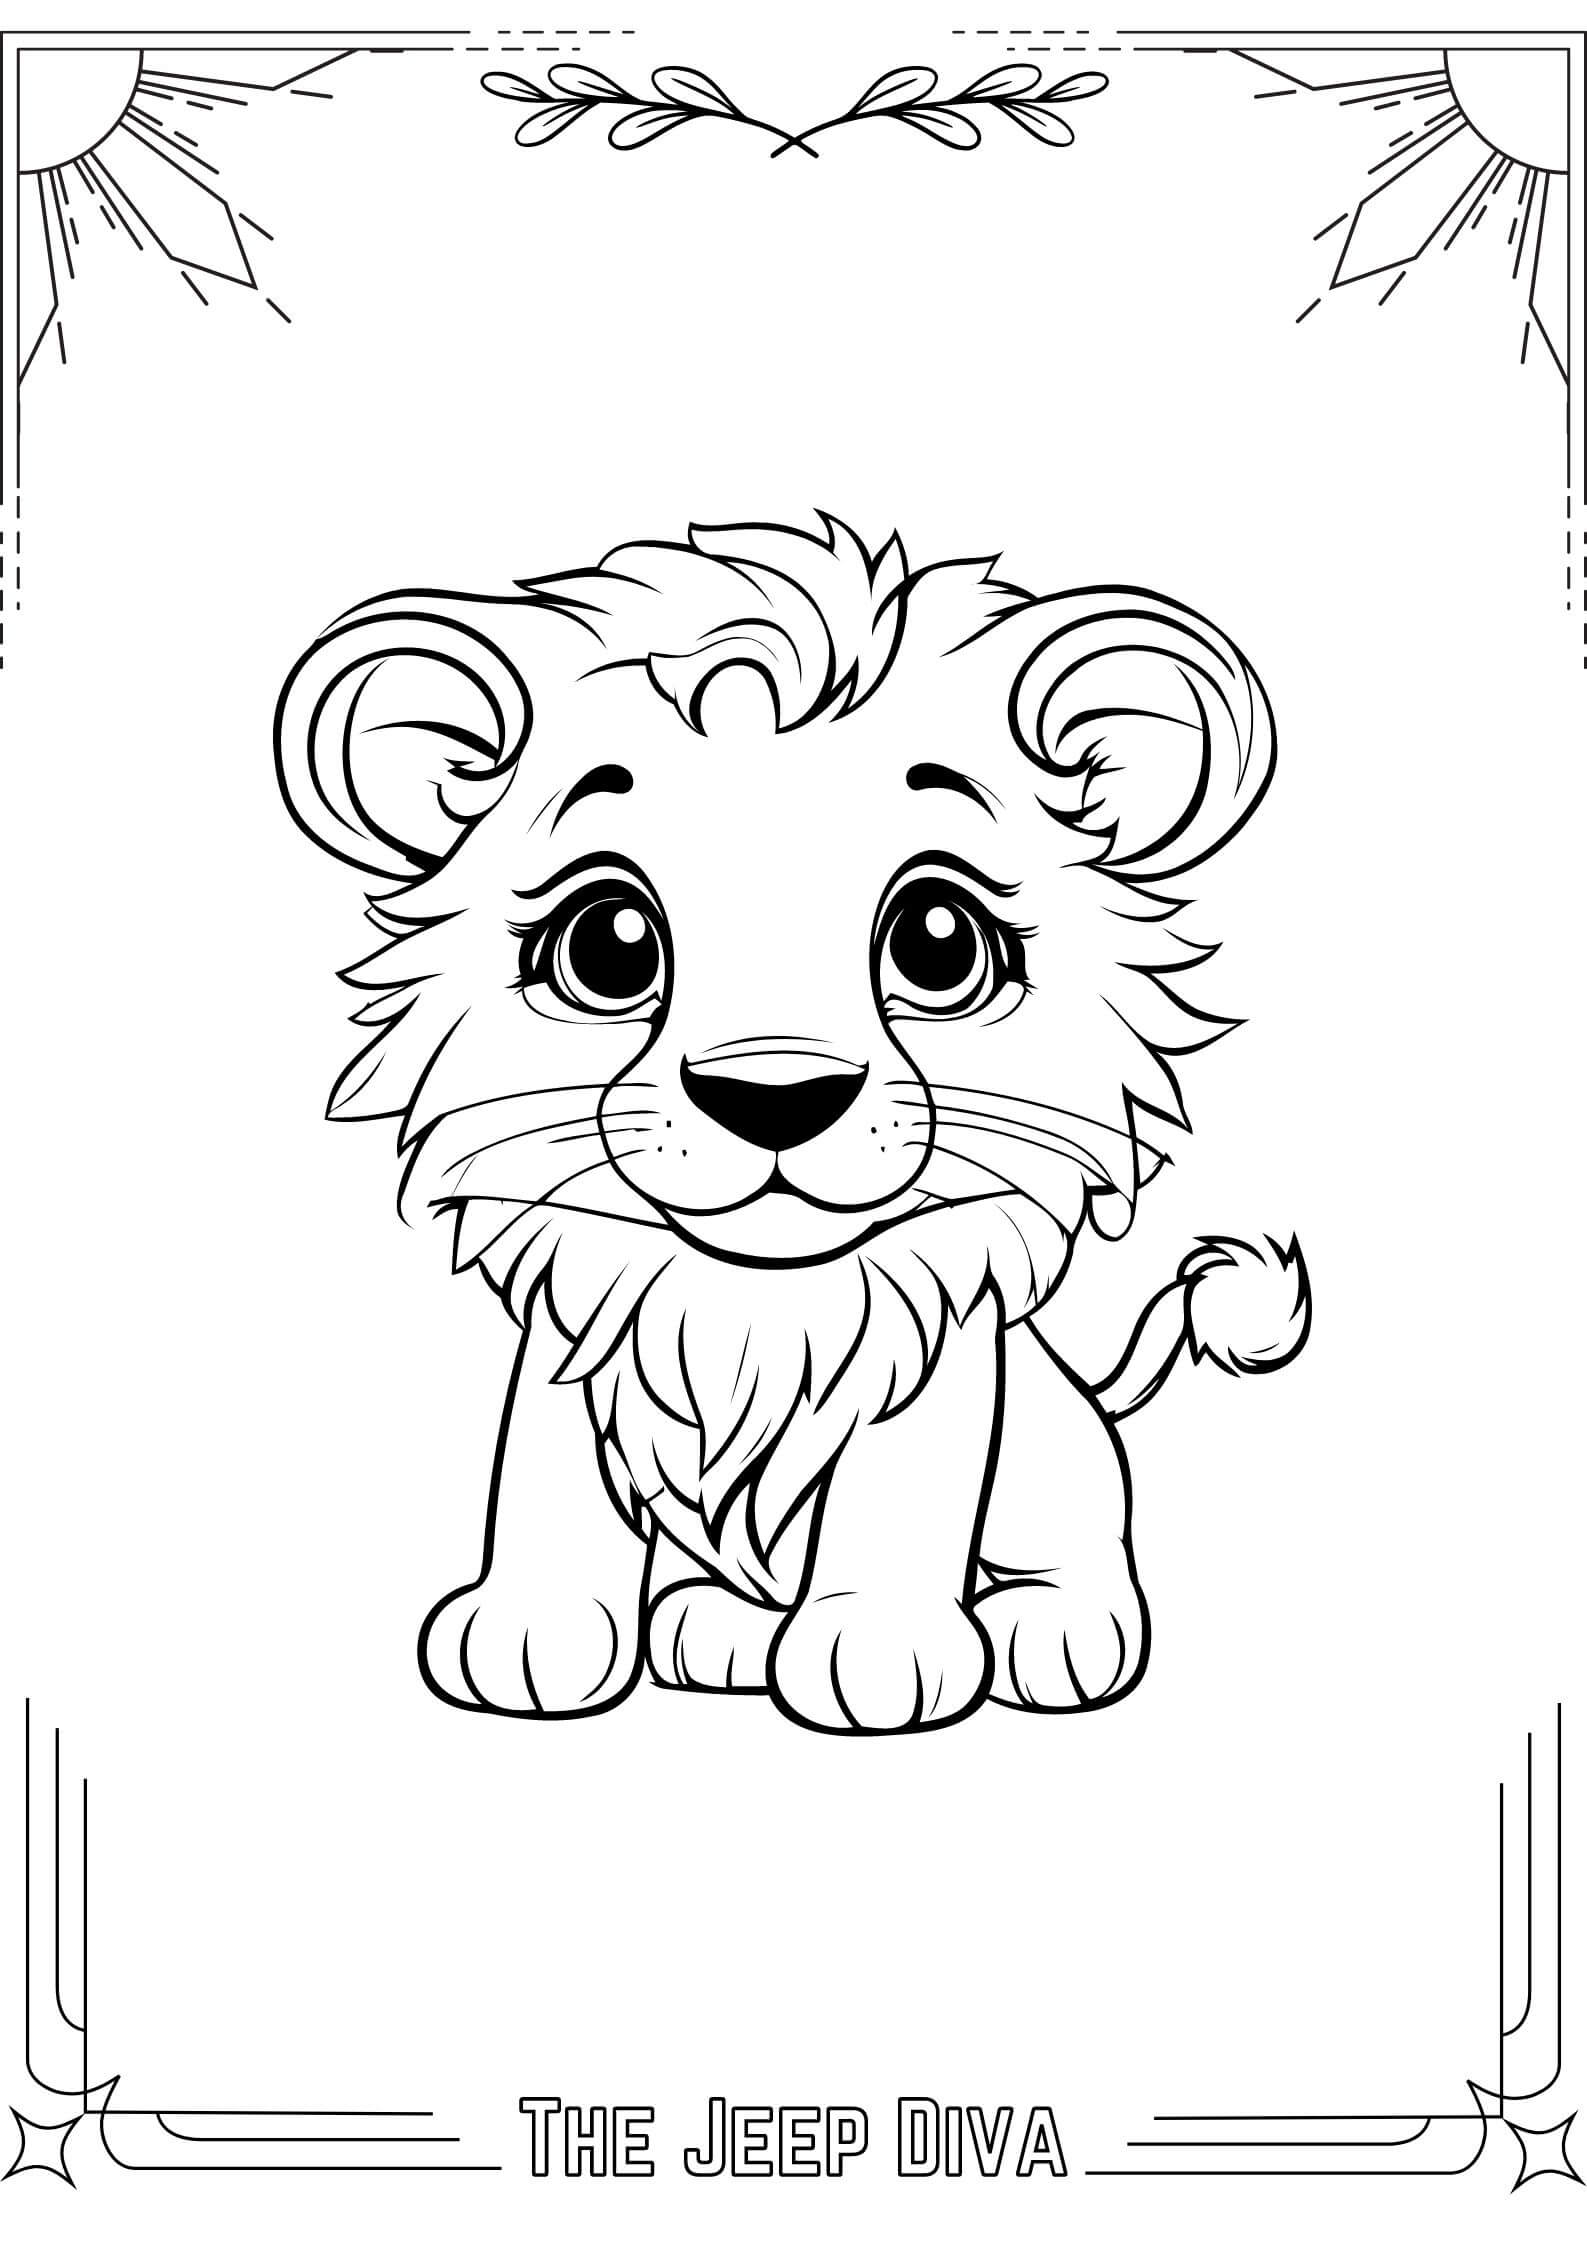 The Jeep Diva Coloring Page 3 Lion